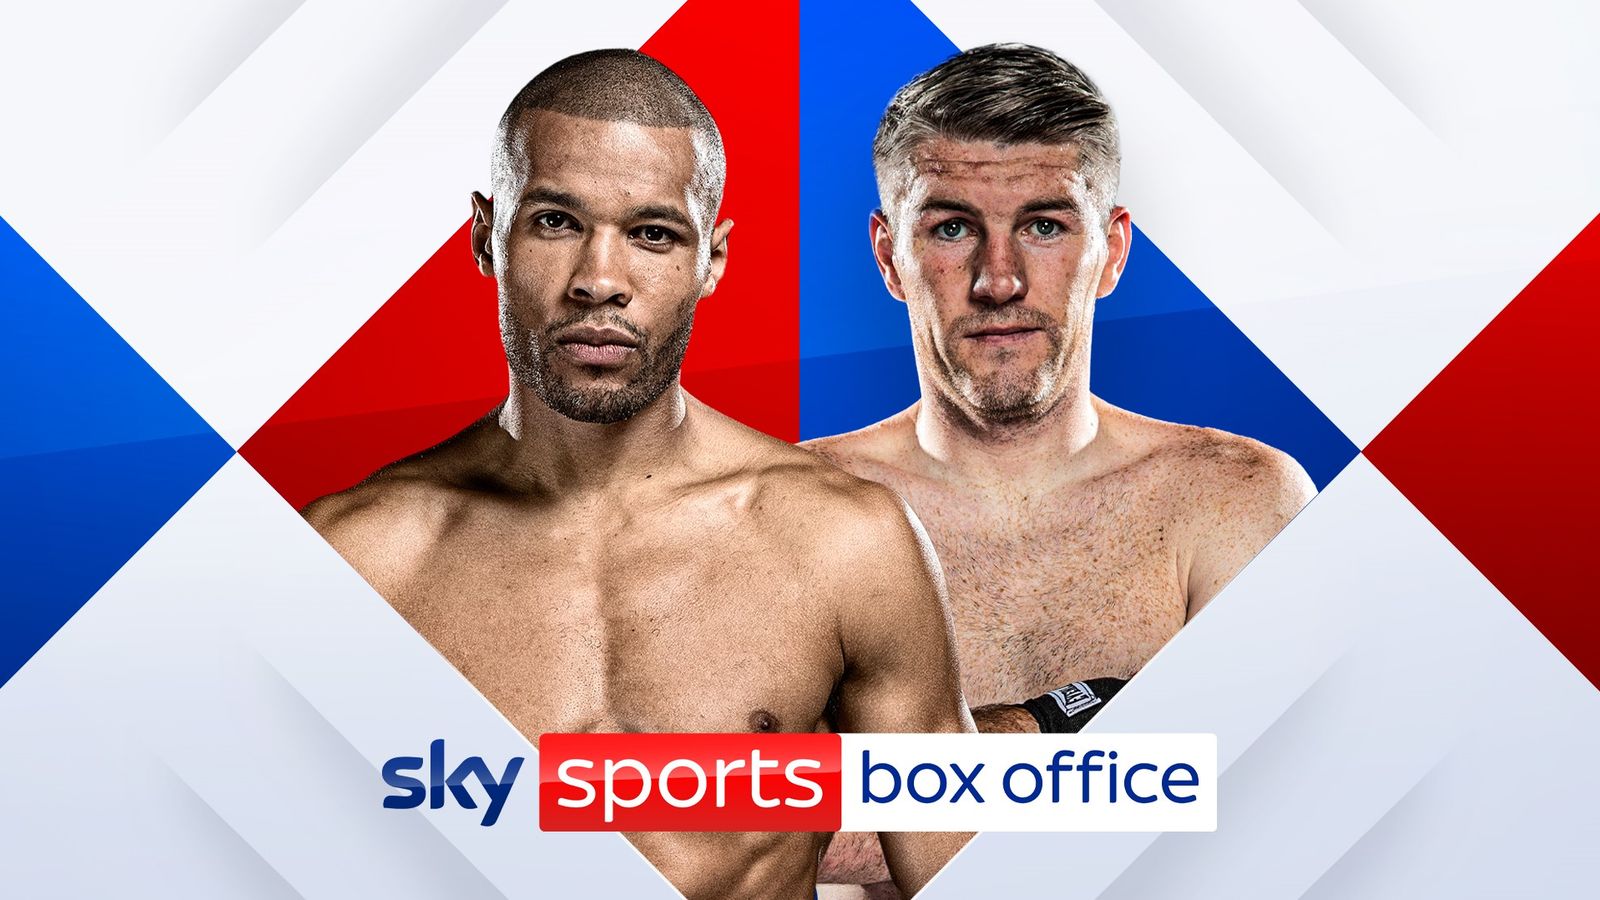 Chris Eubank Jr vs Liam Smith - Fight date, weight and venue confirmed for 2023 showdown live on Sky Sports Box Office